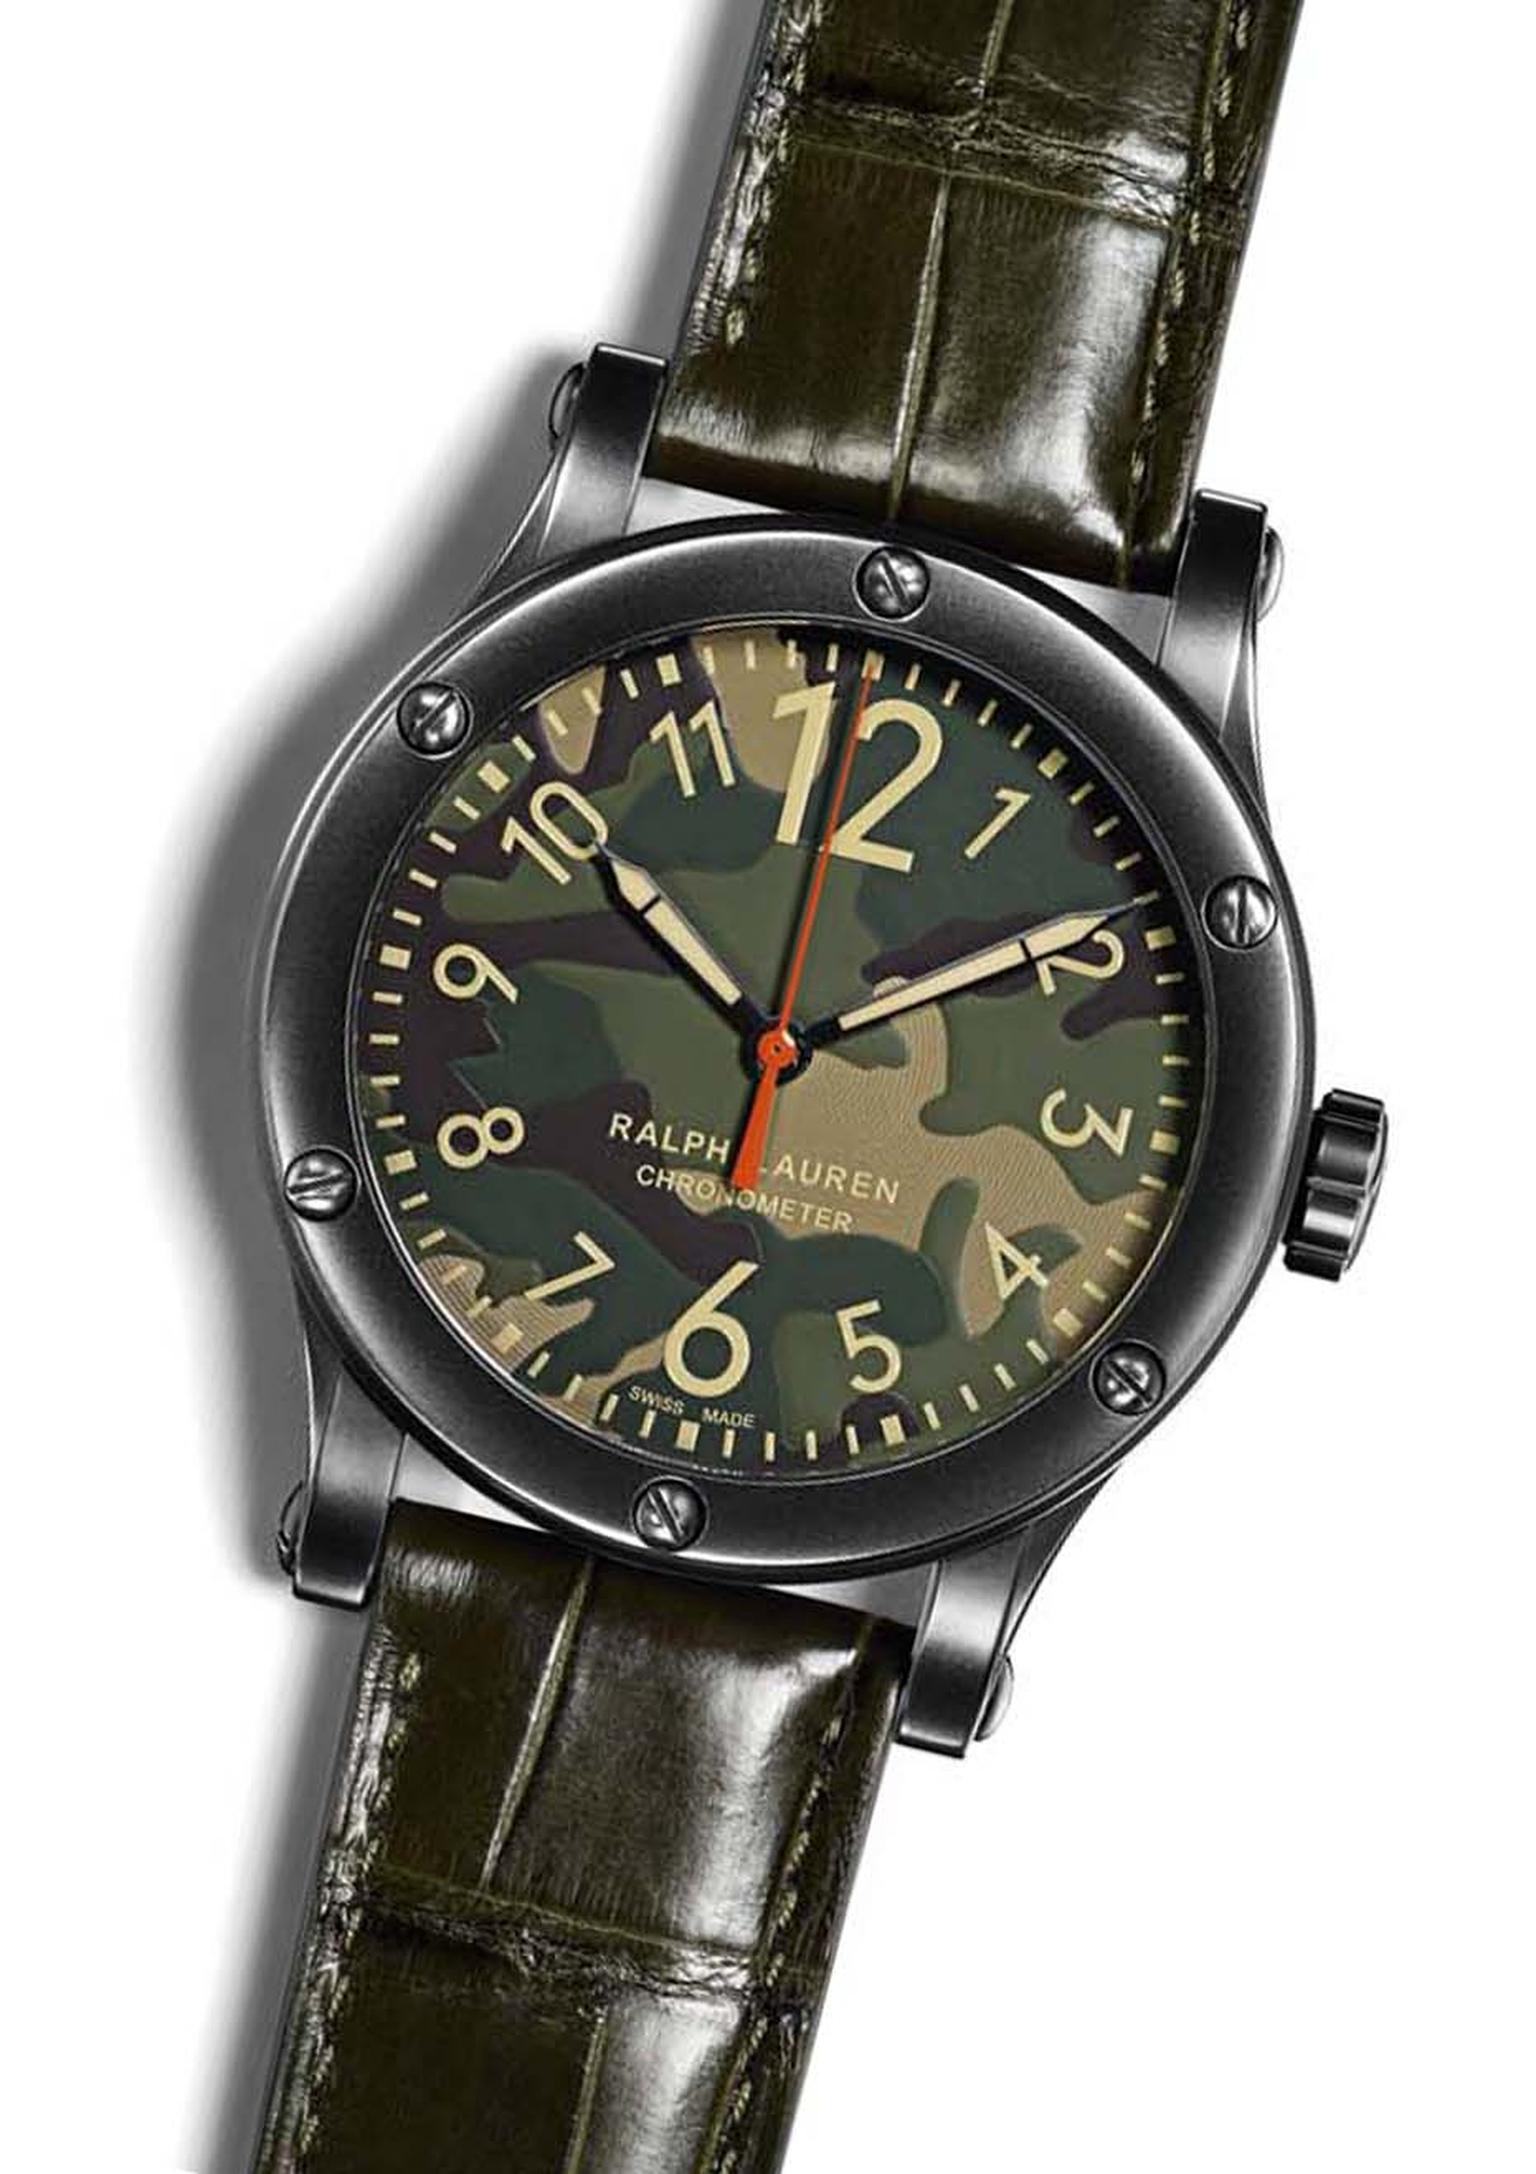 Ralph Lauren watches RL67 Safari Chronometer. Like its brother with the khaki dial, the new camouflage dial watch is equipped with automatic calibre RL300-1, a Swiss COSC-certified chronometer movement water-resistant to 100 metres.